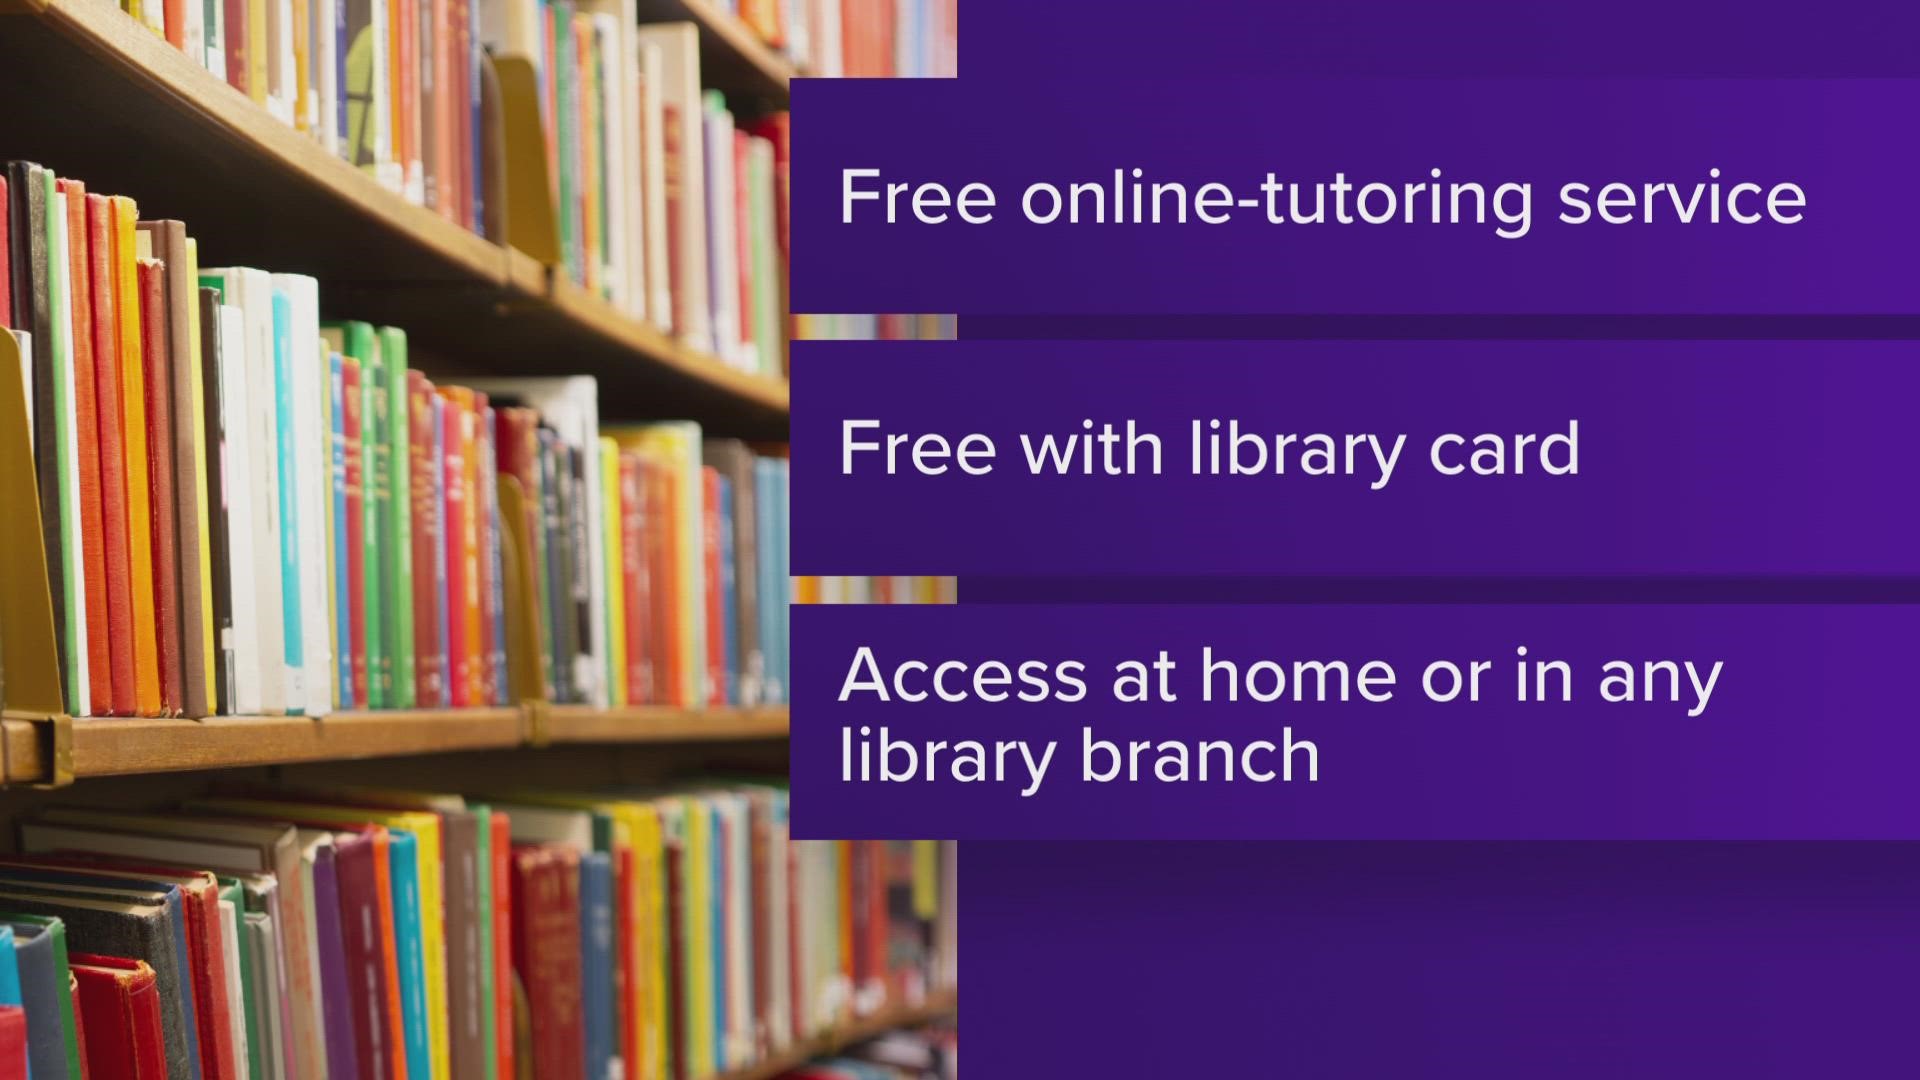 Kindergarten through 12th grade students with a library card can access online tutoring services seven days a week.